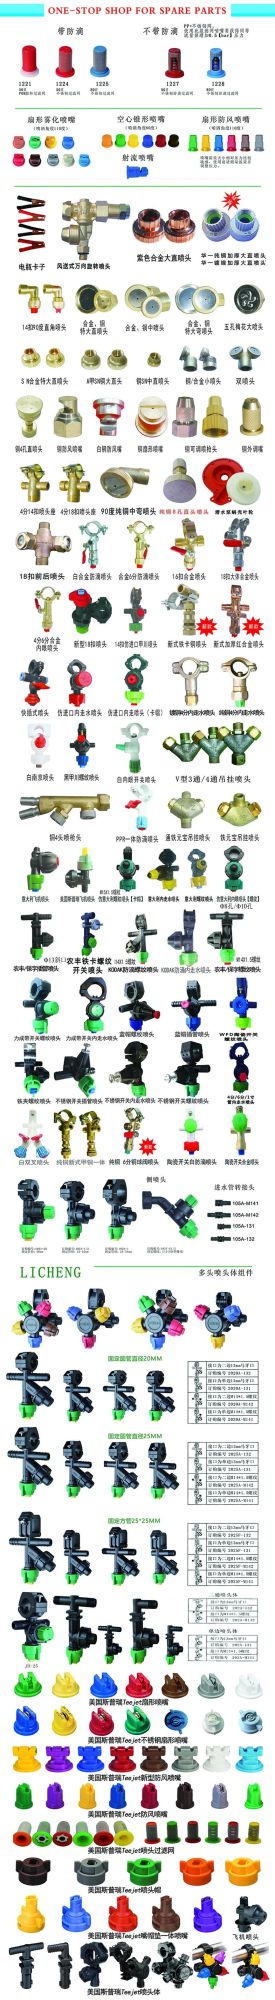 Pressure Stainless Steel Pesticide Plastic Jet Teejet Hypro Txvk Agricultural Machinery Nozzle